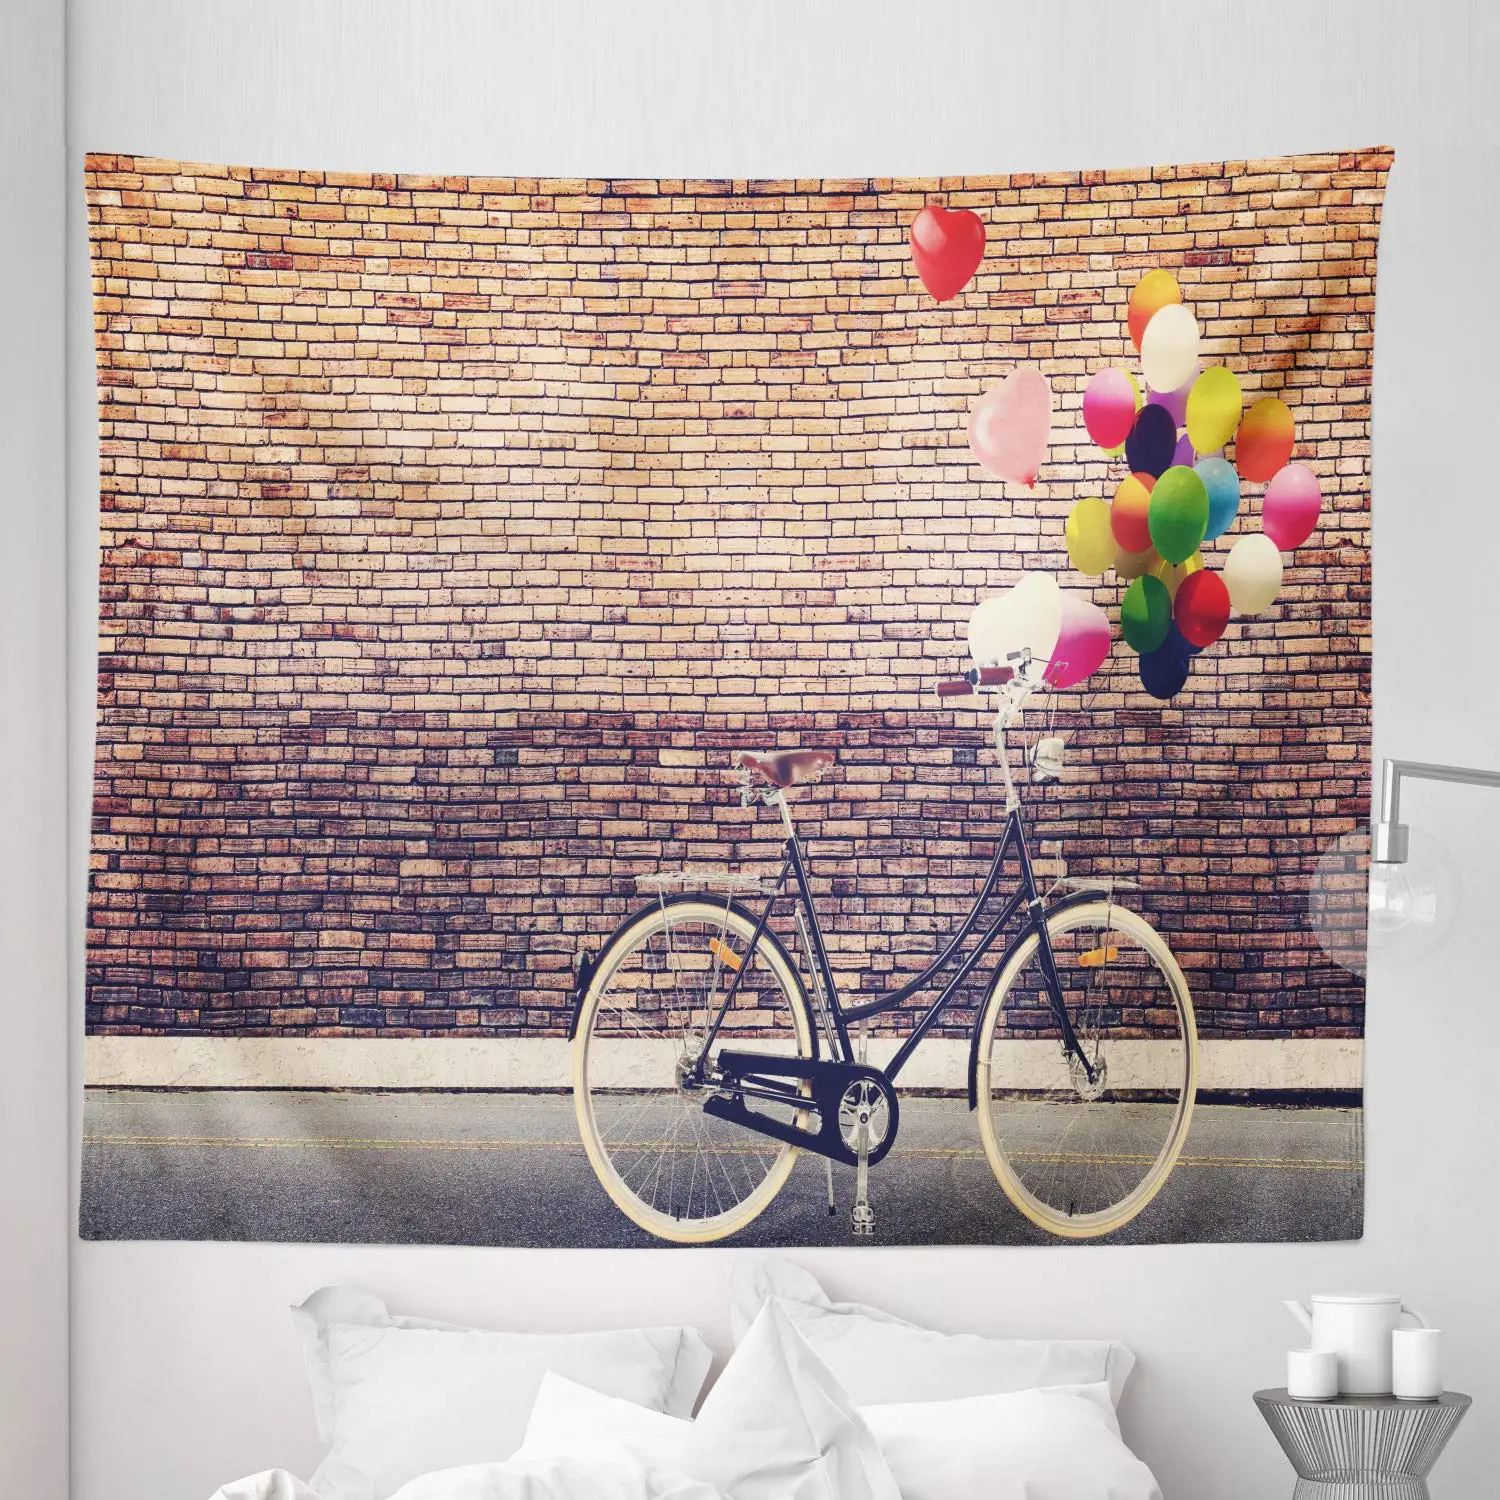 

Bicycle Tapestry Classic Road Bike Tapestry Brick Wall Town Life Tapestry Wall Hanging Art for Bedroom Living Room Dorm Decor